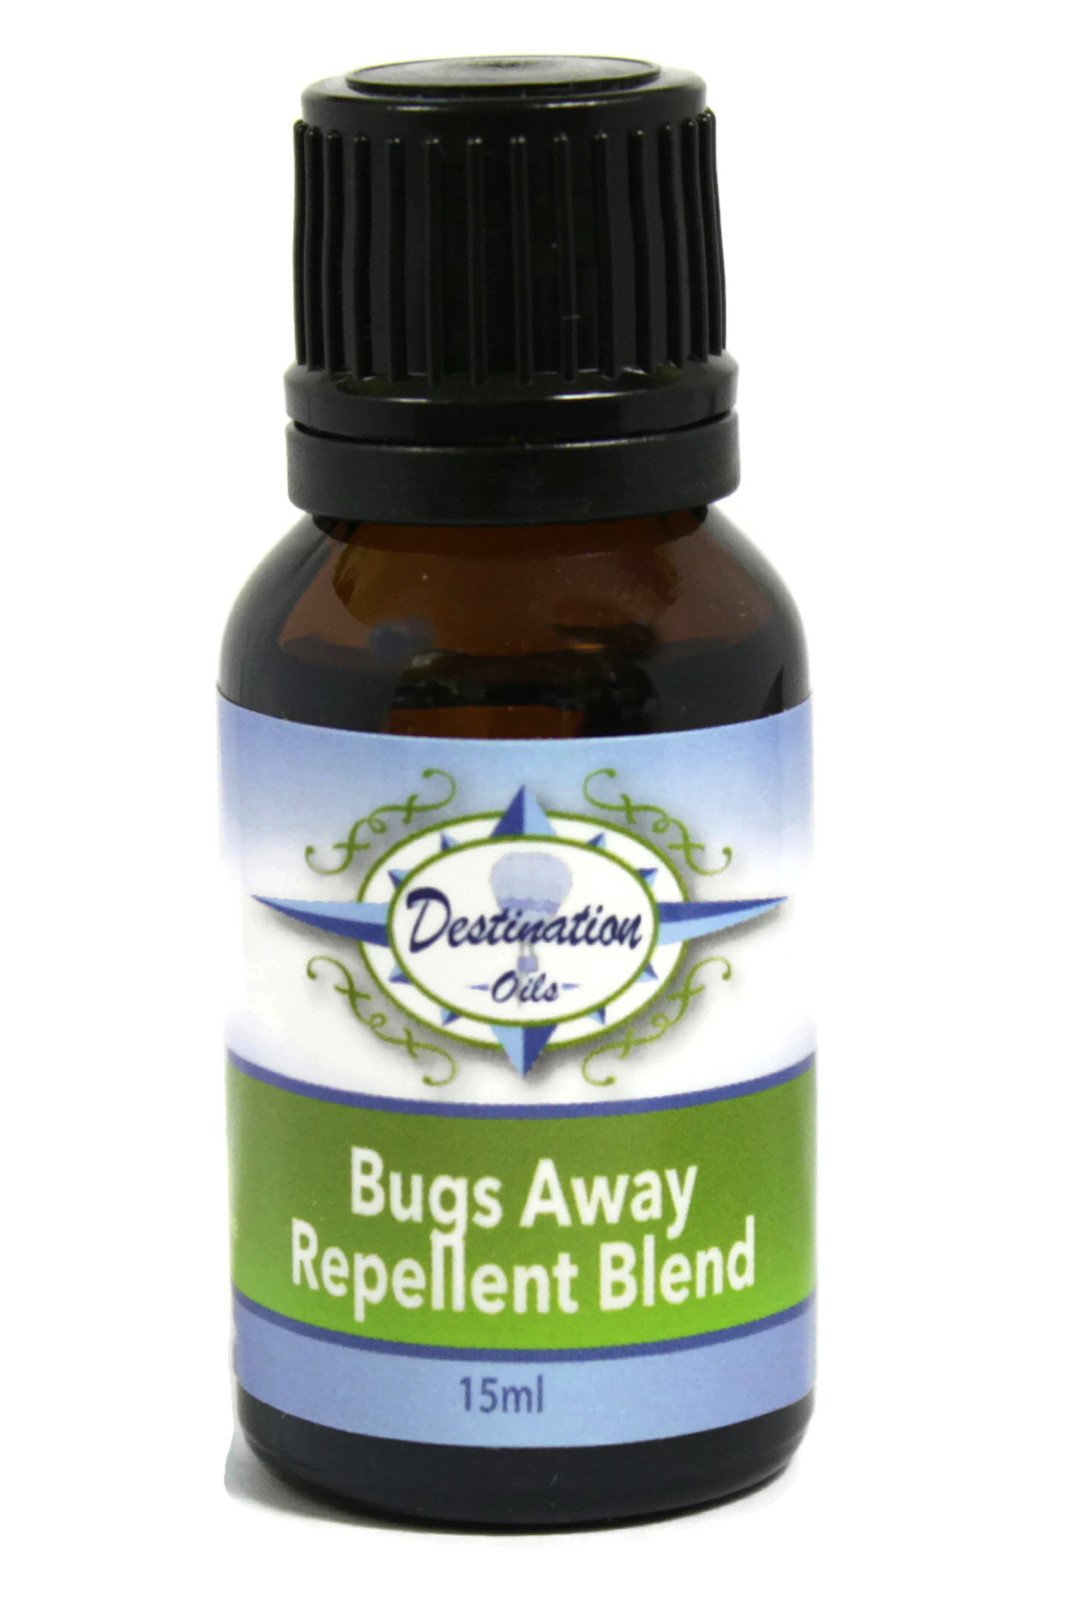 Bugs Away - Insect Repellent Essential Oil Blend - 15ml-Essential Oil Blend-Destination Oils